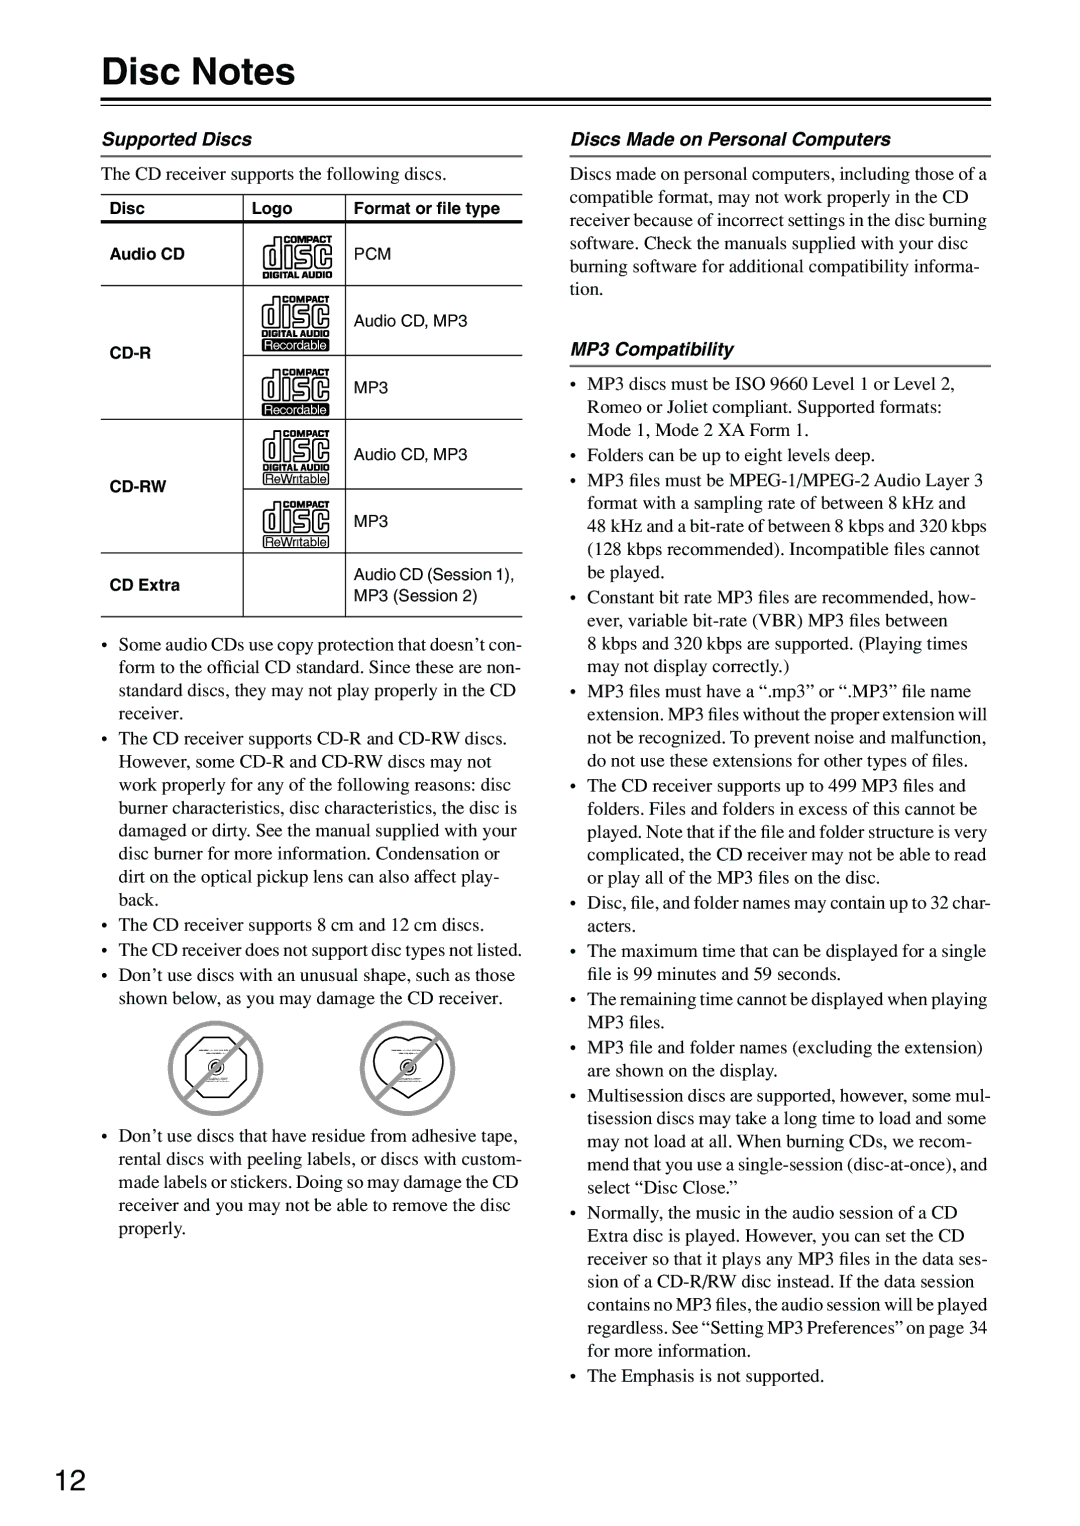 Onkyo CR-715DAB instruction manual Disc Notes, Supported Discs 